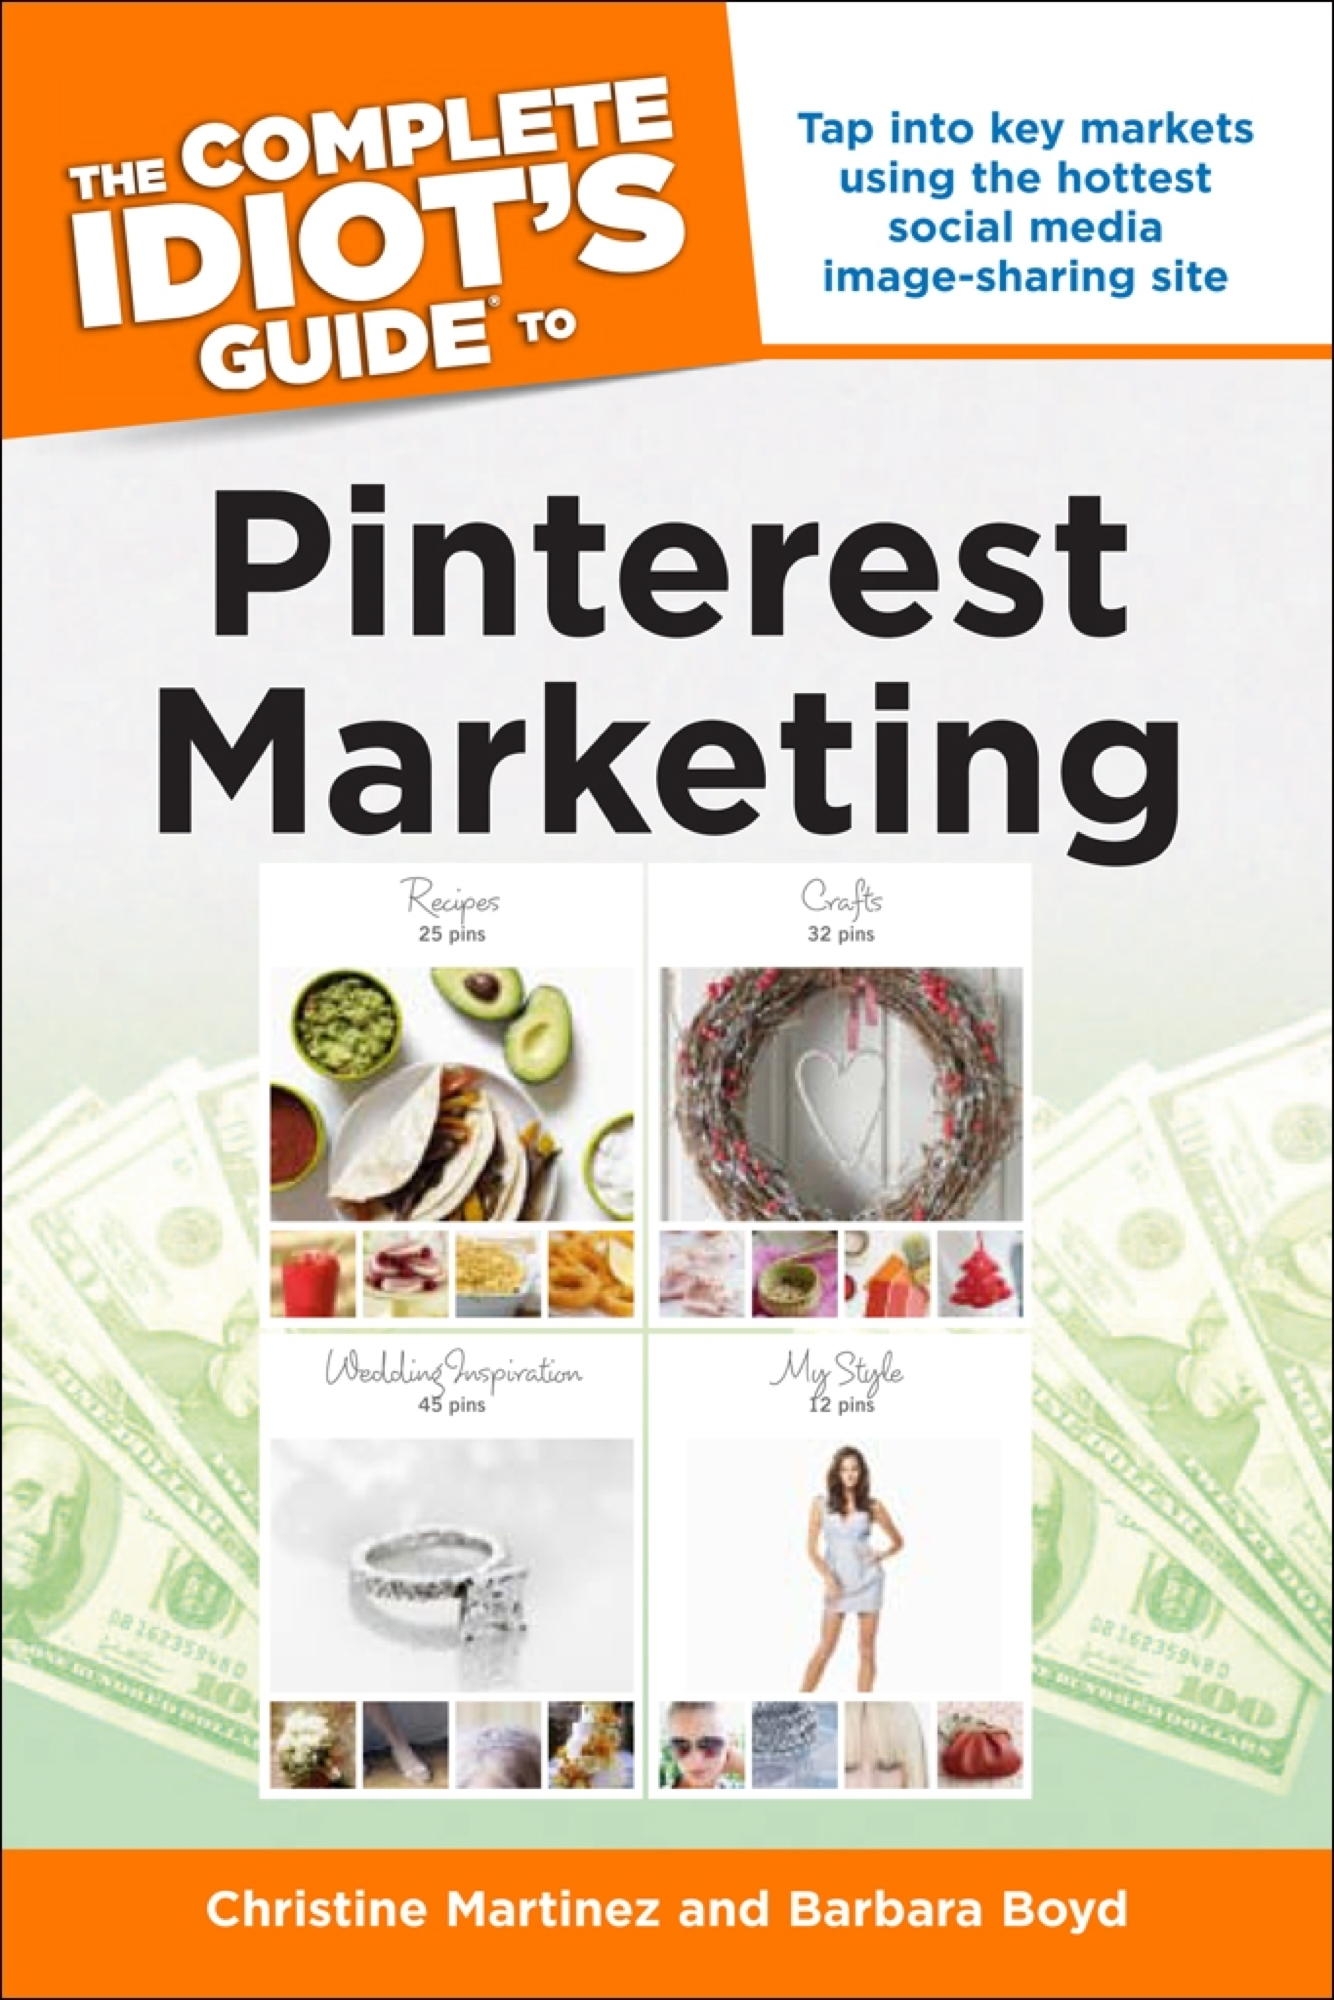 The Complete Idiot's Guide to Pinterest Marketing